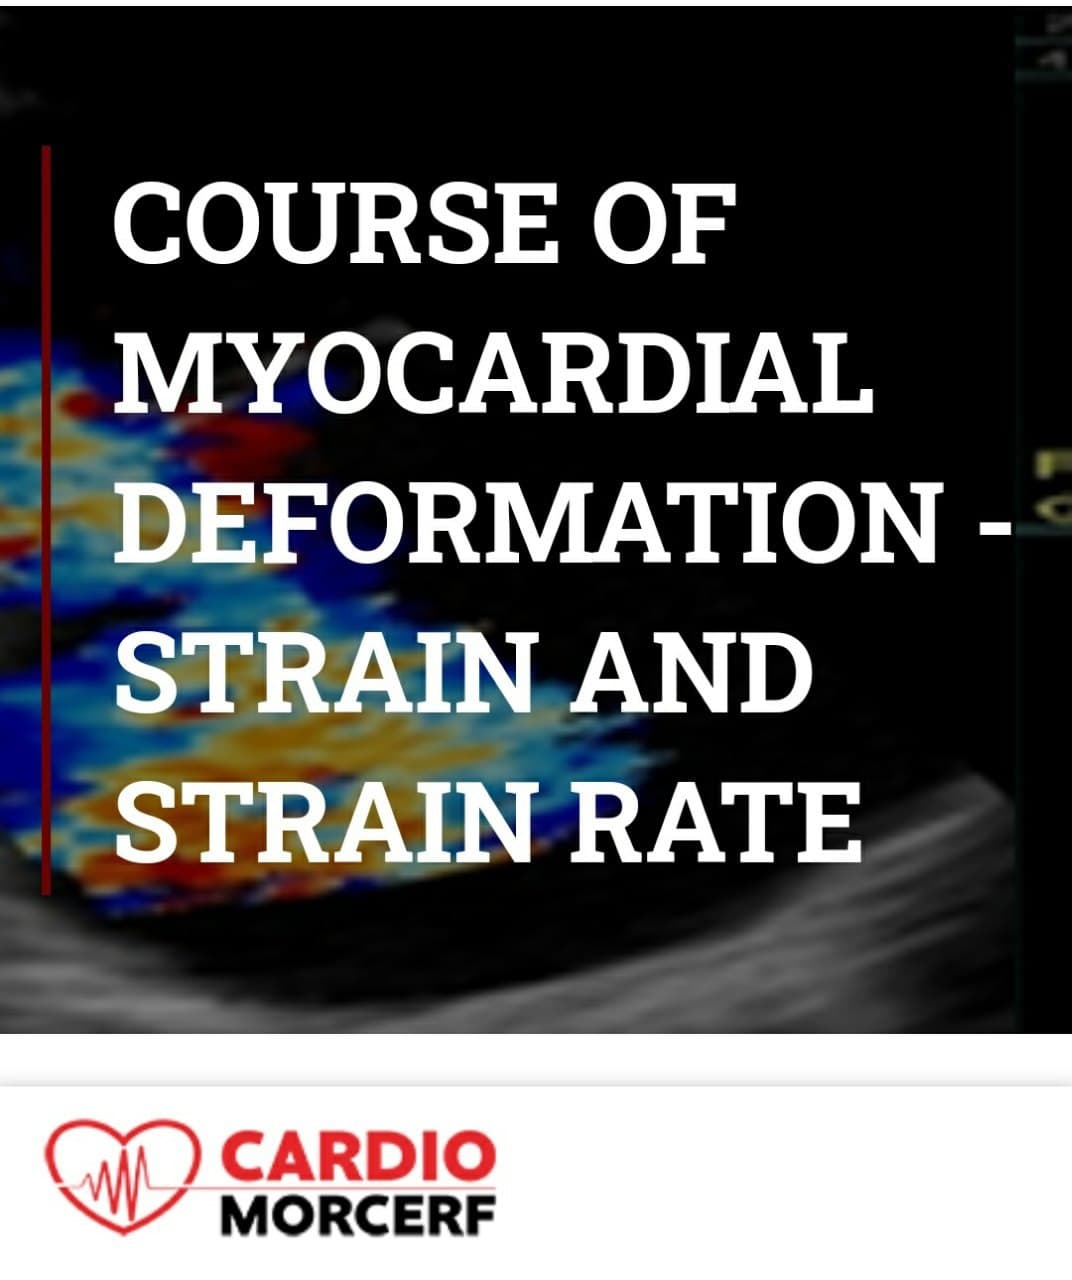 Morcerf Course of Myocardial Deformation – Strain and Strain Rate 2020 | Medical Video Courses.